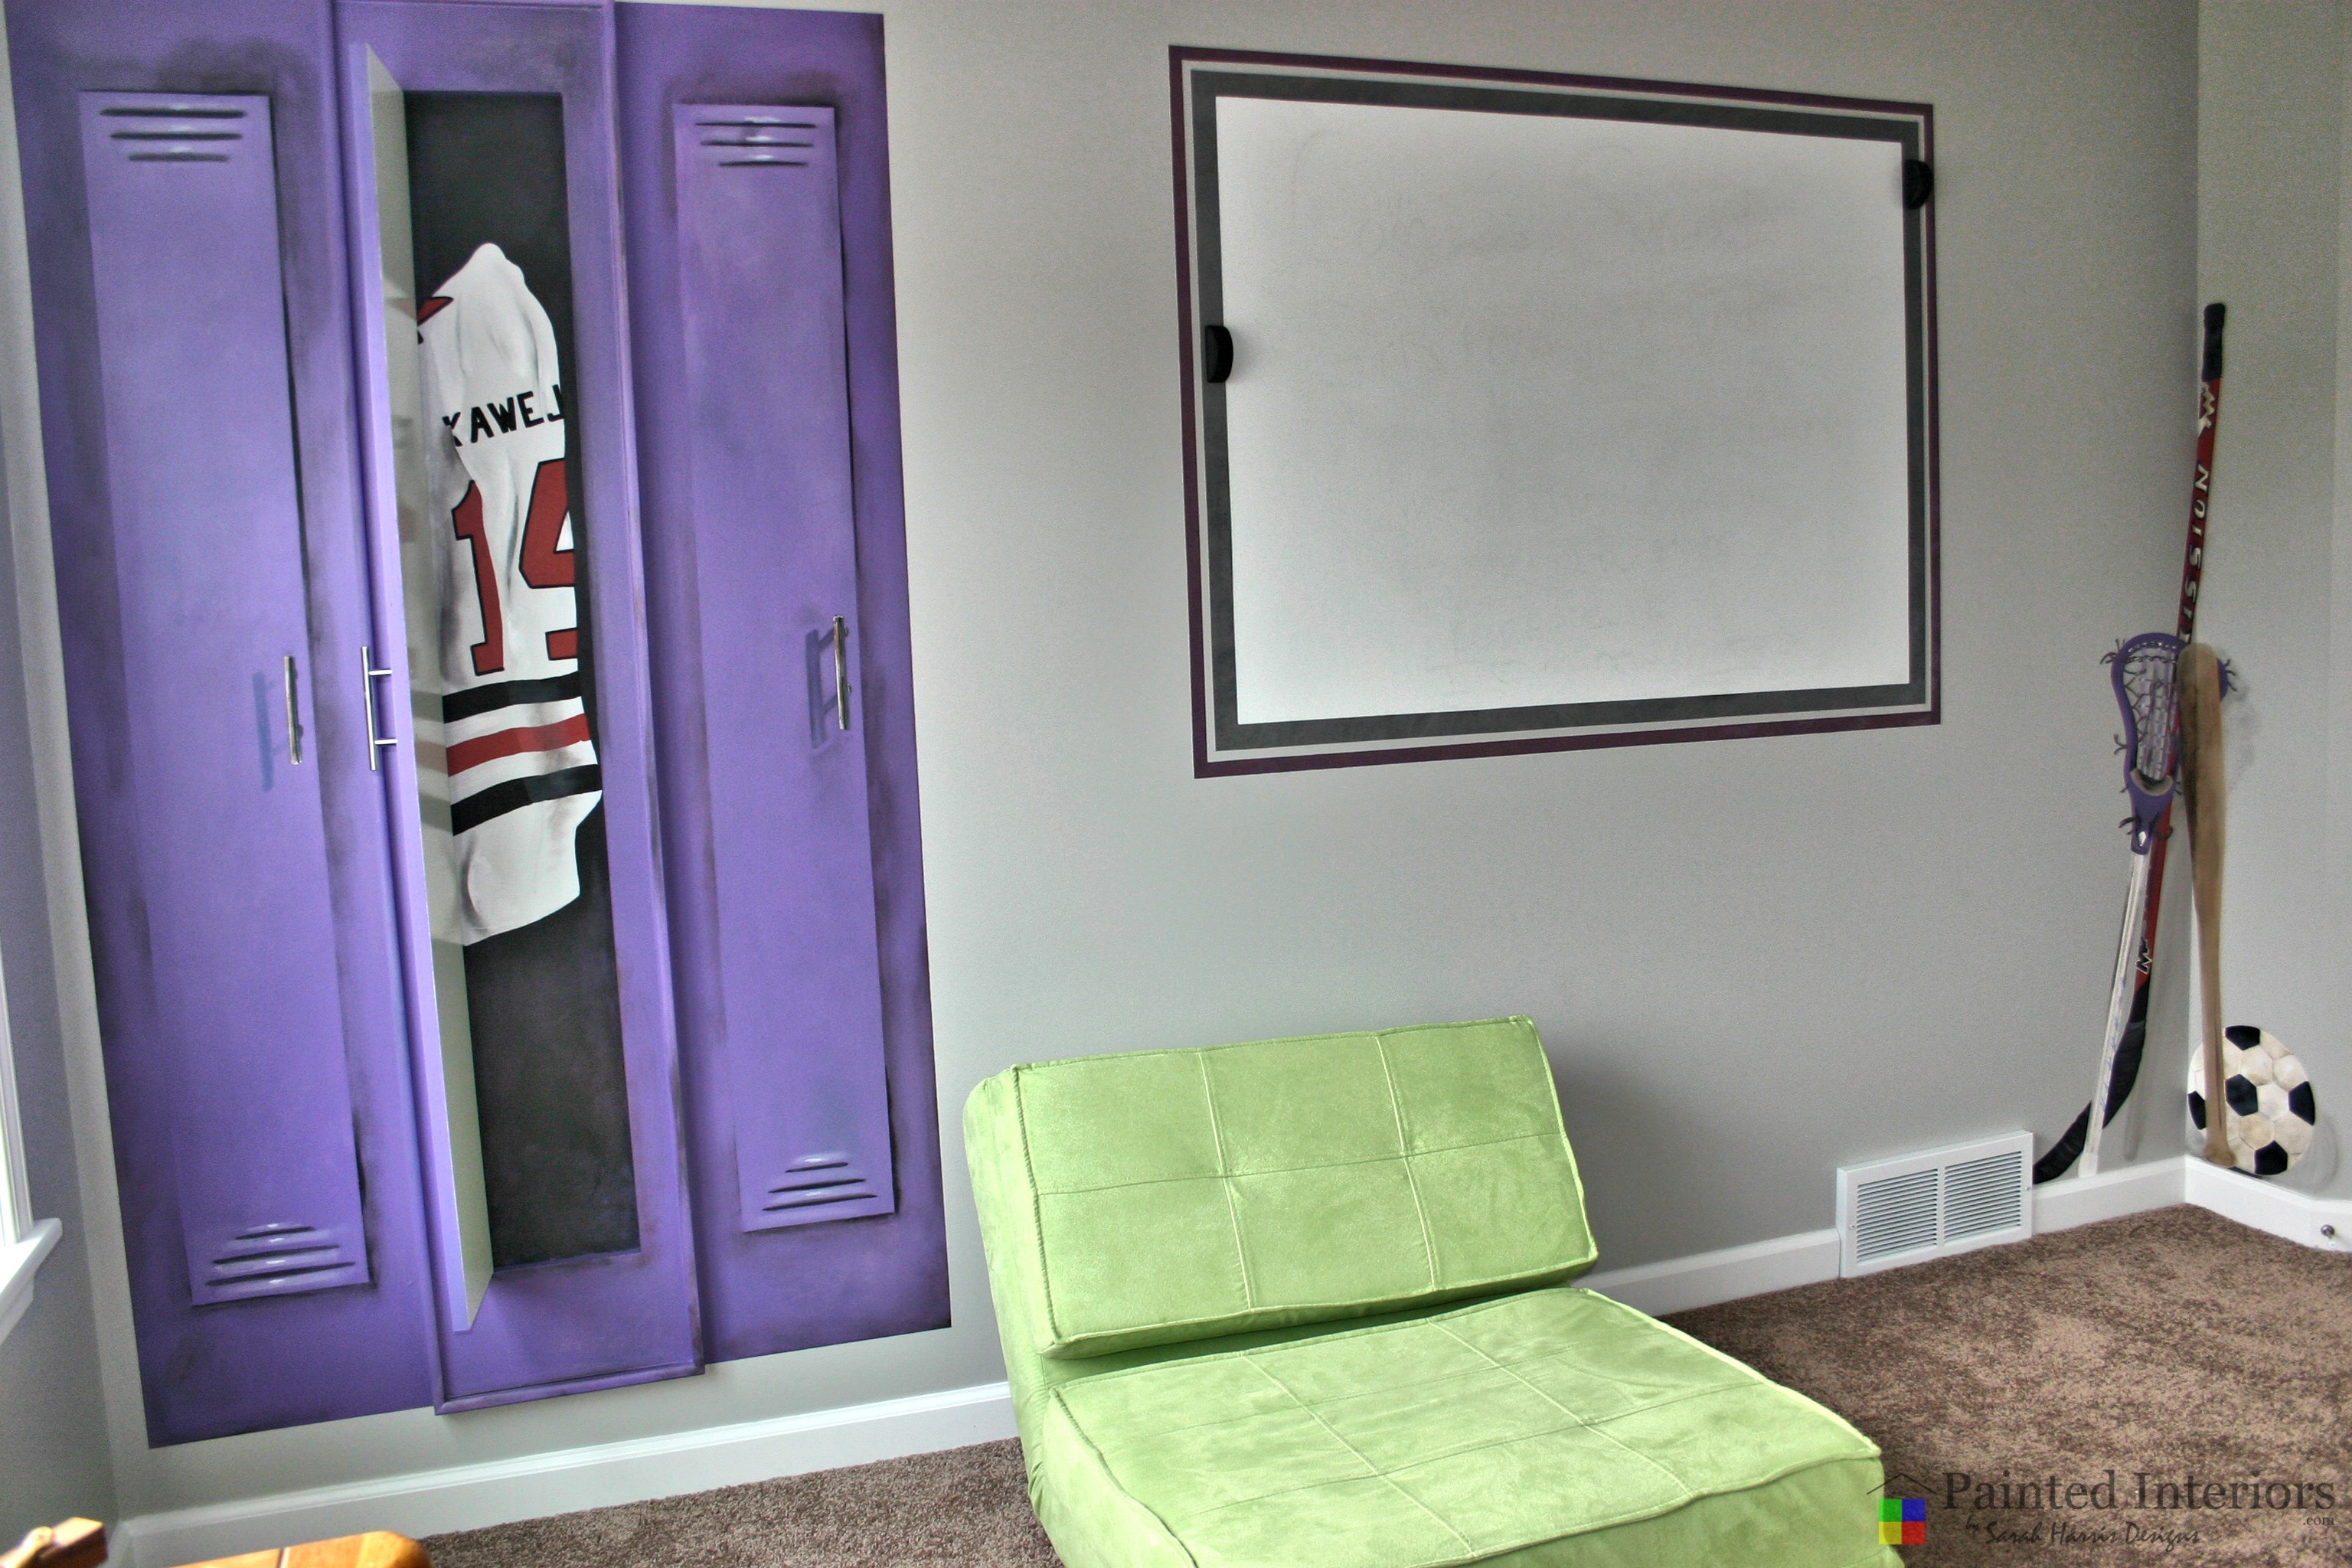 hockey themed room with trompe l'oeil lockers and sports equipment